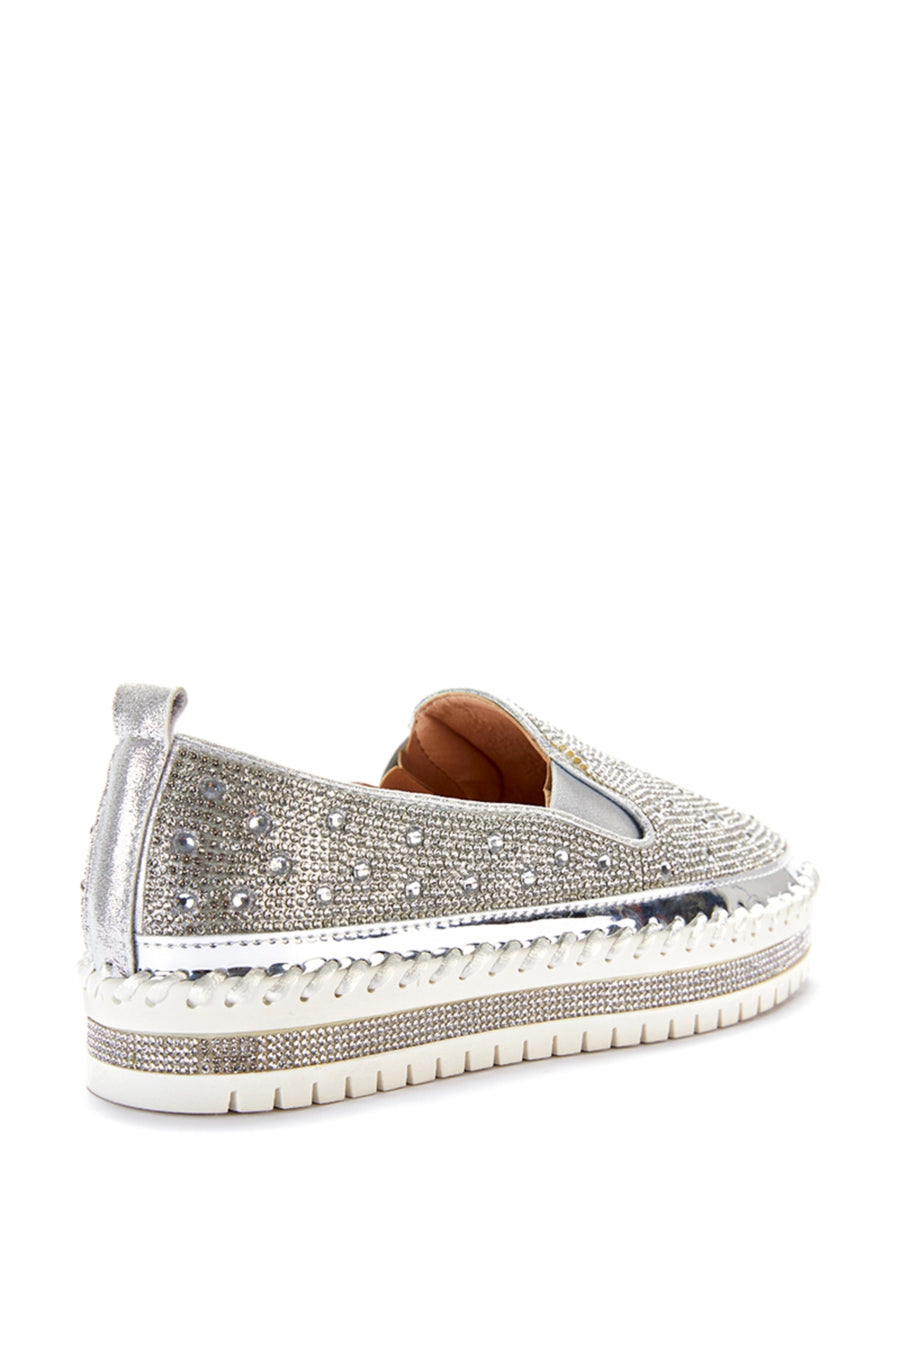 back view of slip on metallic silver flat sneakers with crystal rhinestone embellishments and a white braided platform sole